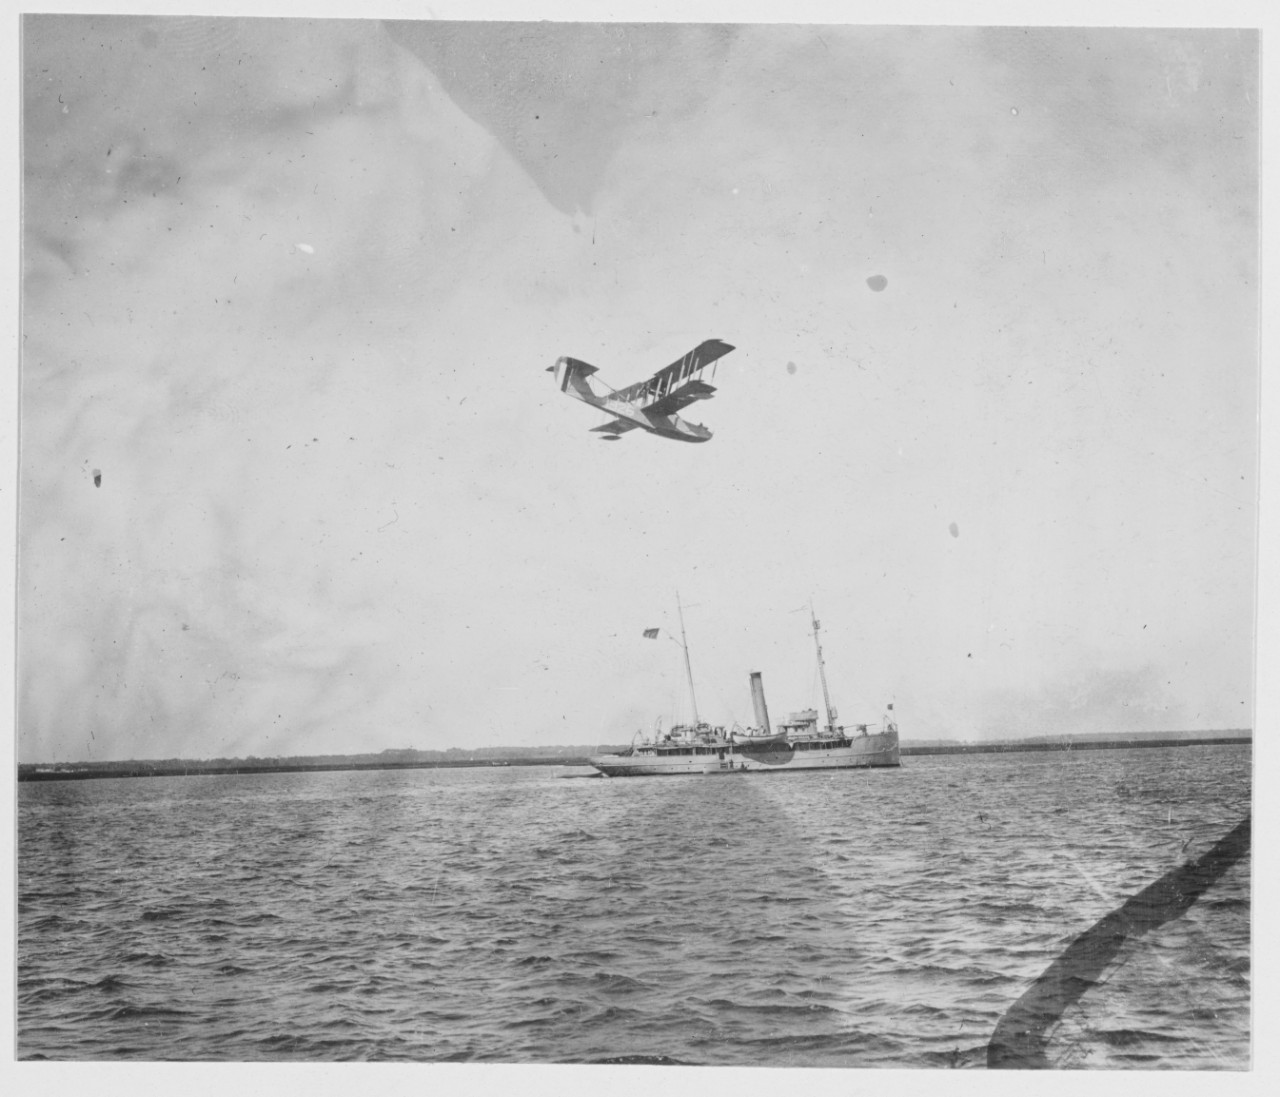 Seaplane flying over ship. Cape May (Sewells Point), New Jersey